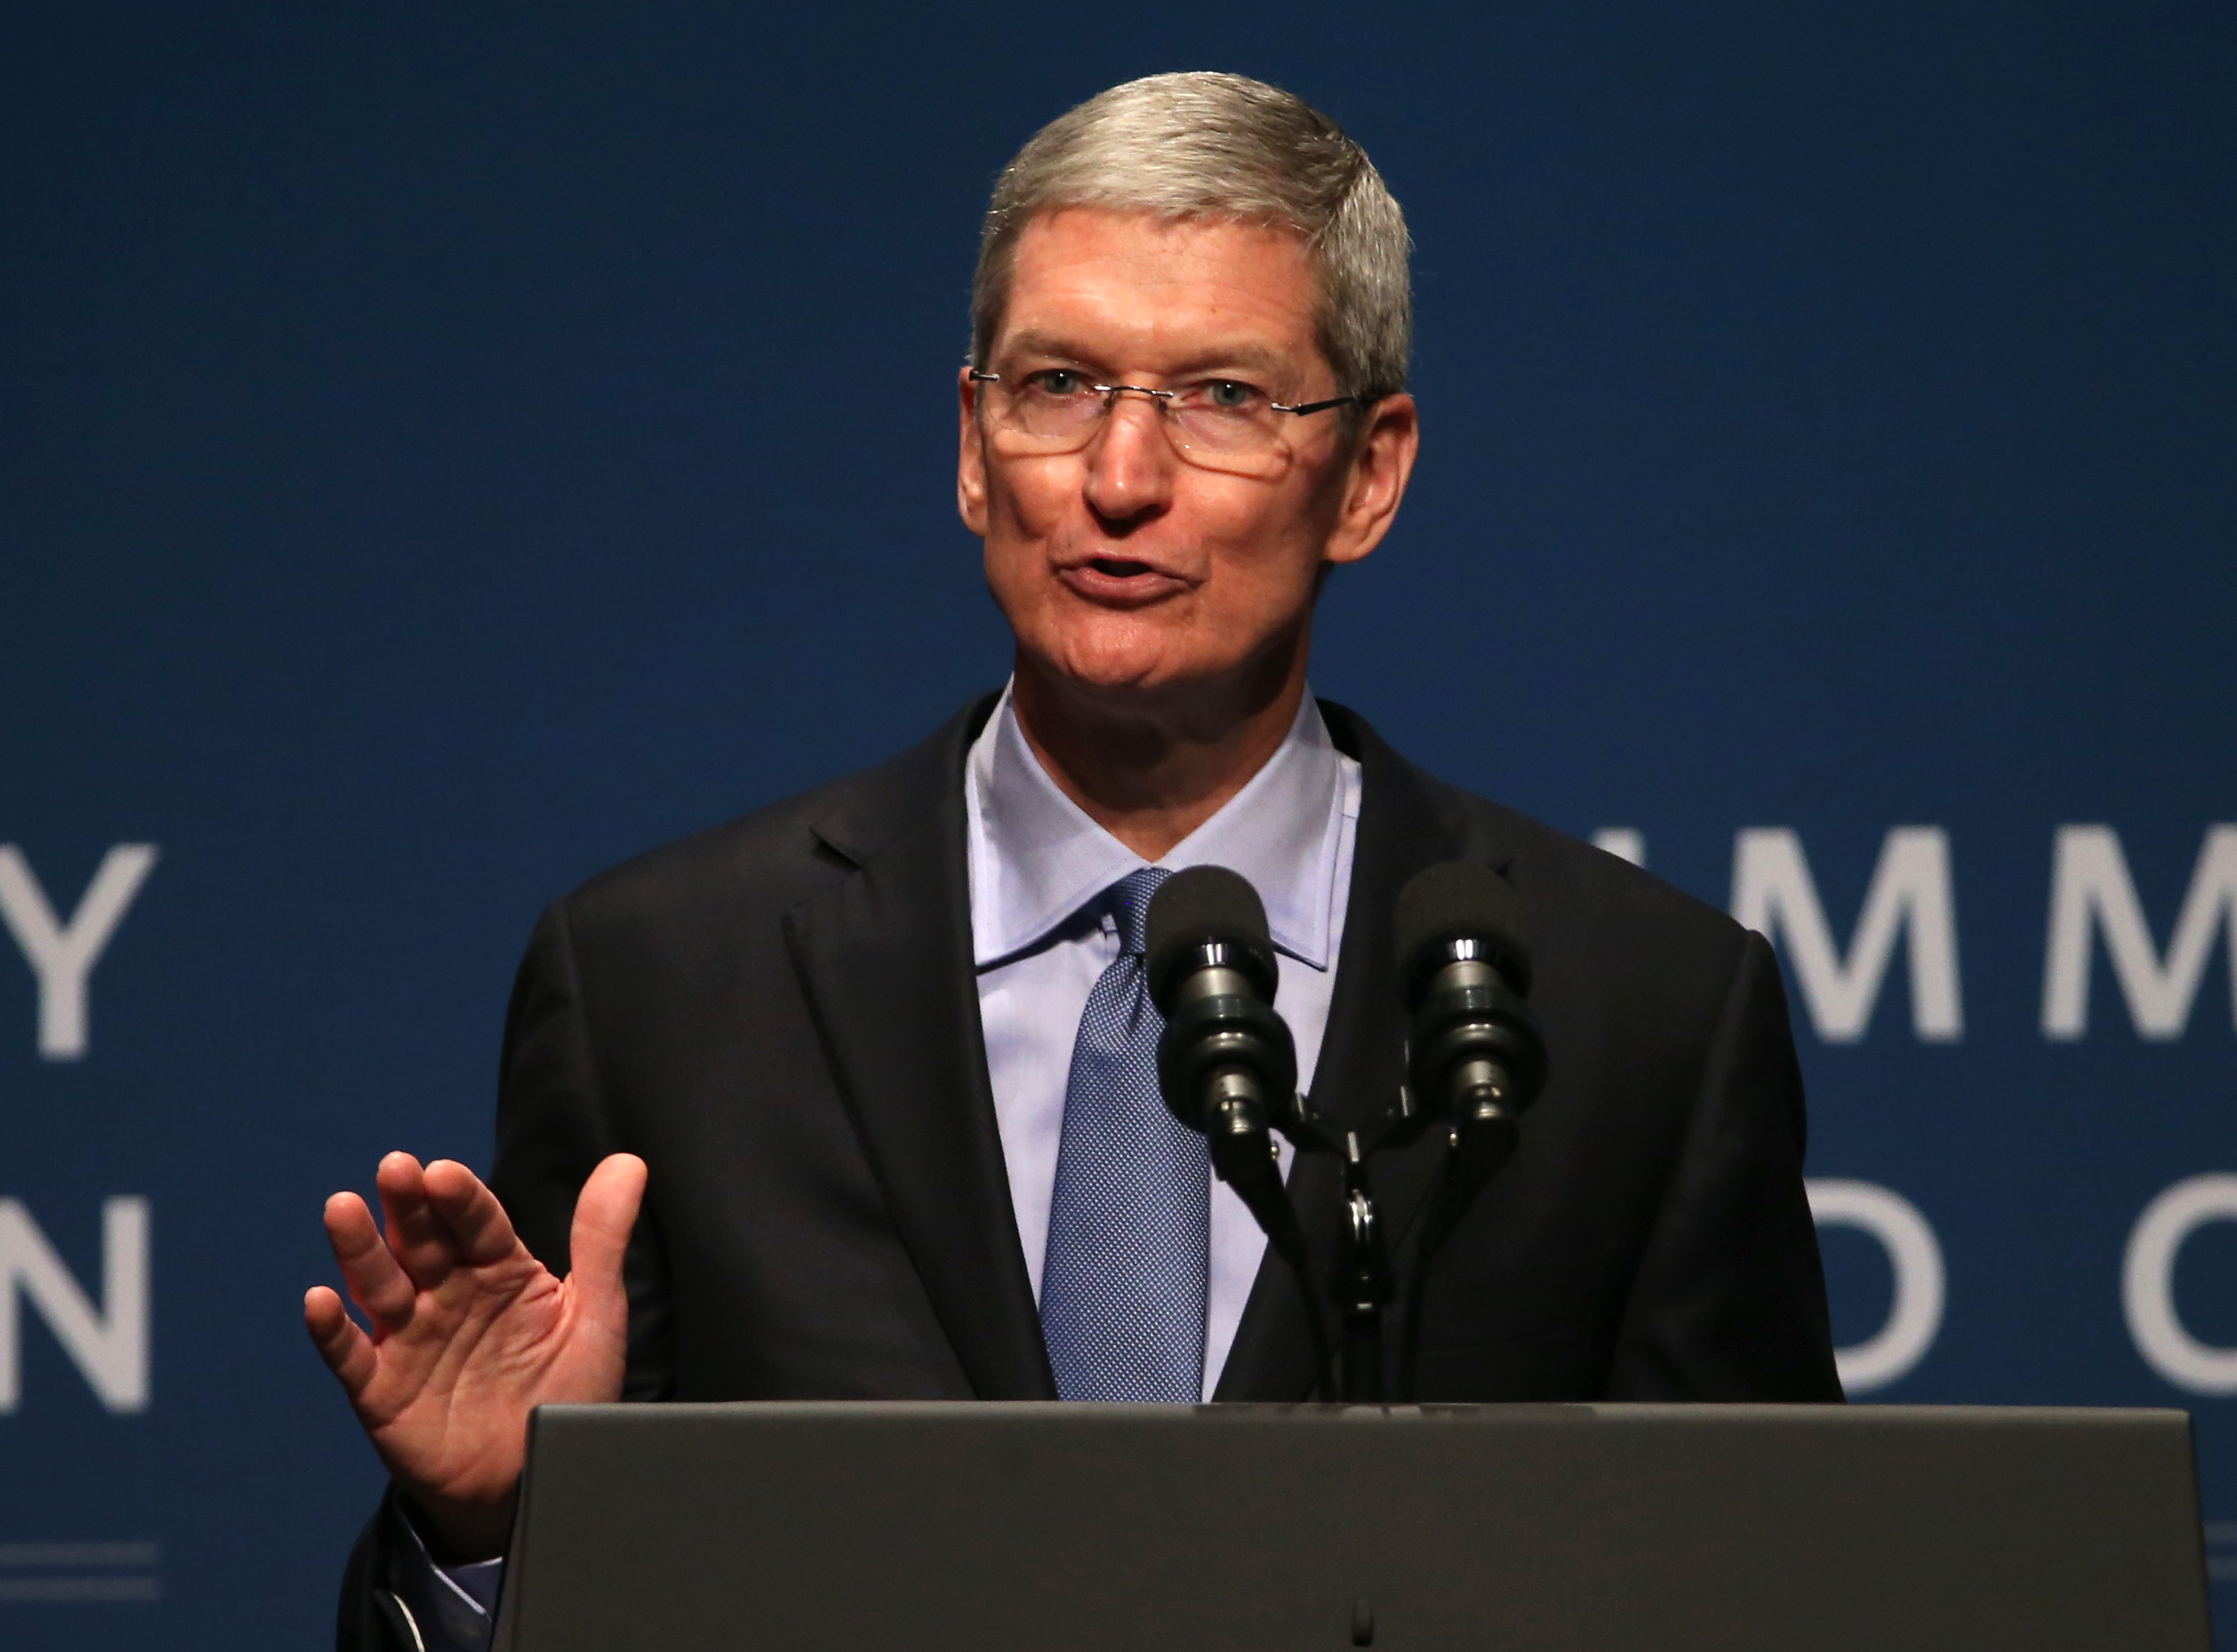 Apple CEO Tim Cook speaks during the White House Summit on Cybersecurity and Consumer Protection in Stanford, Calif. on Feb. 13, 2015. (Justin Sullivan—Getty Images)